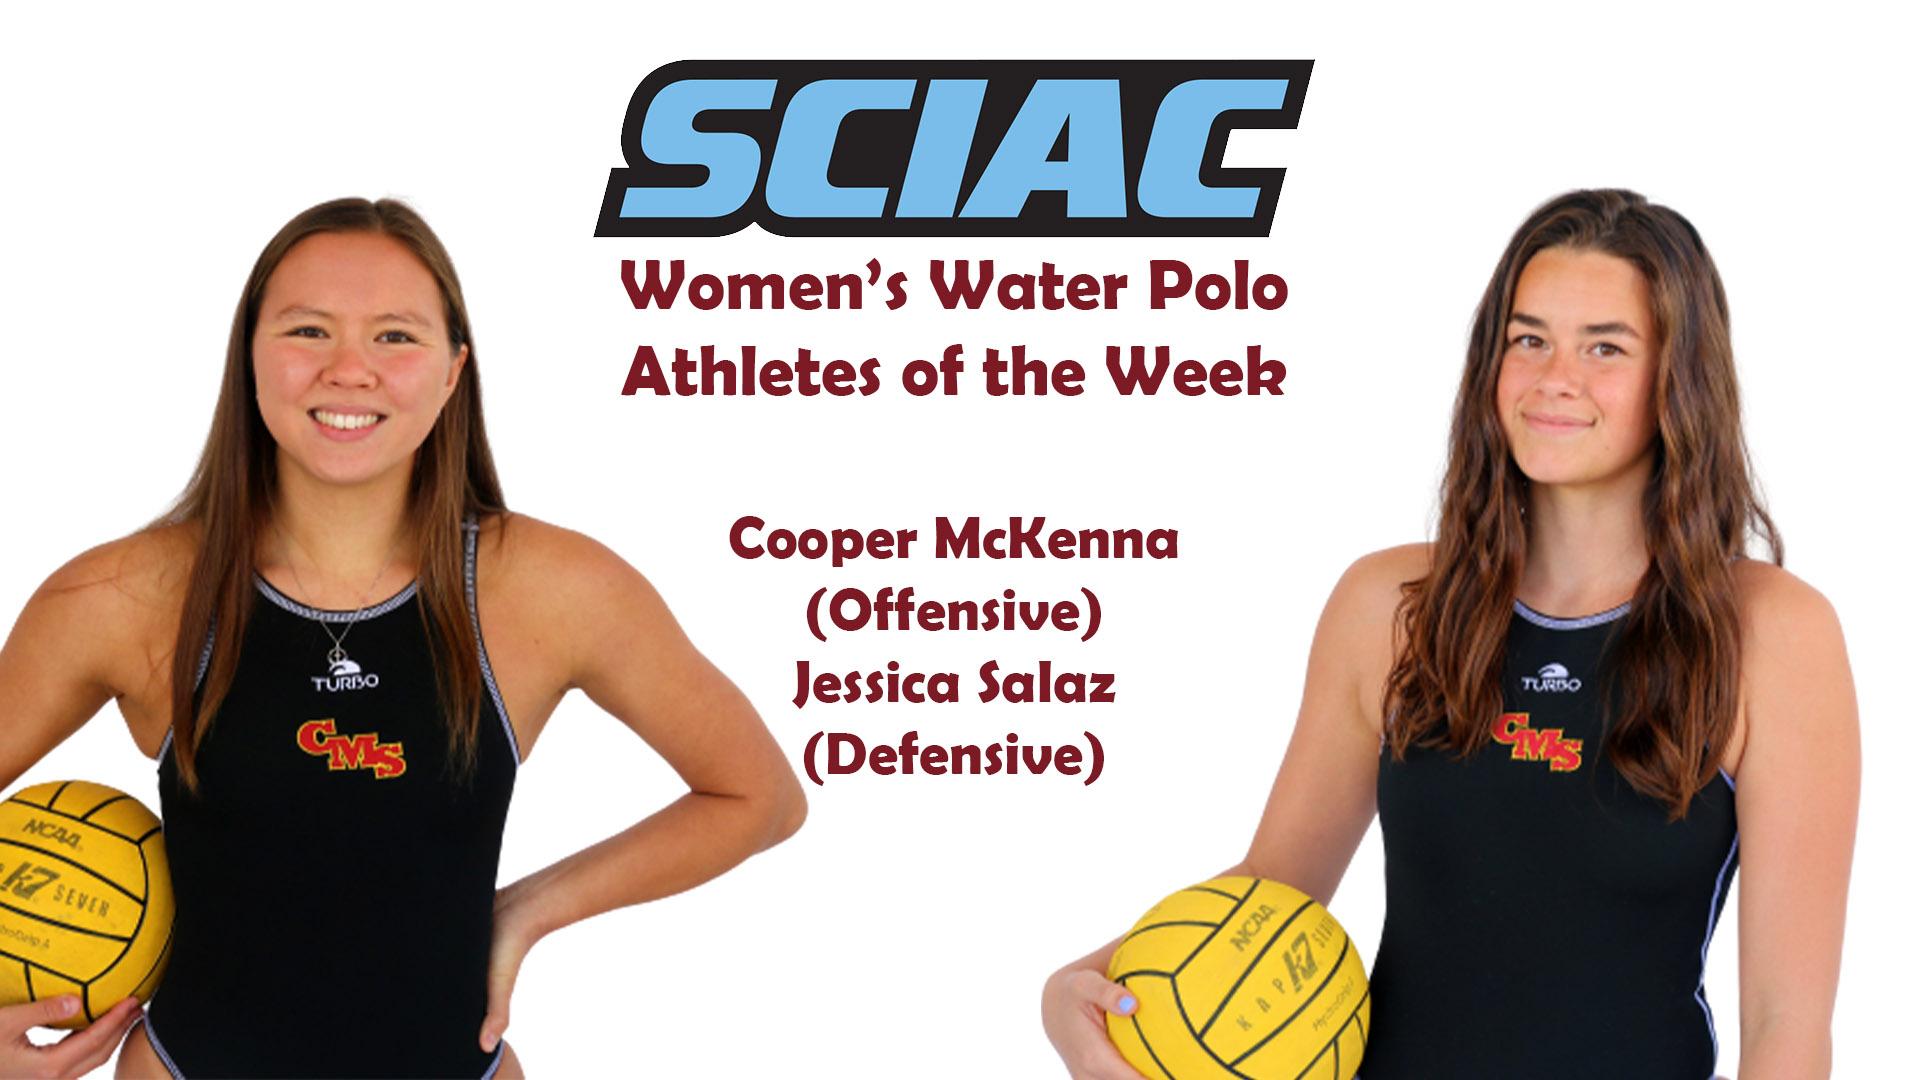 Posed shots of Cooper McKenna and Jessica Salaz with the SCIAC logo